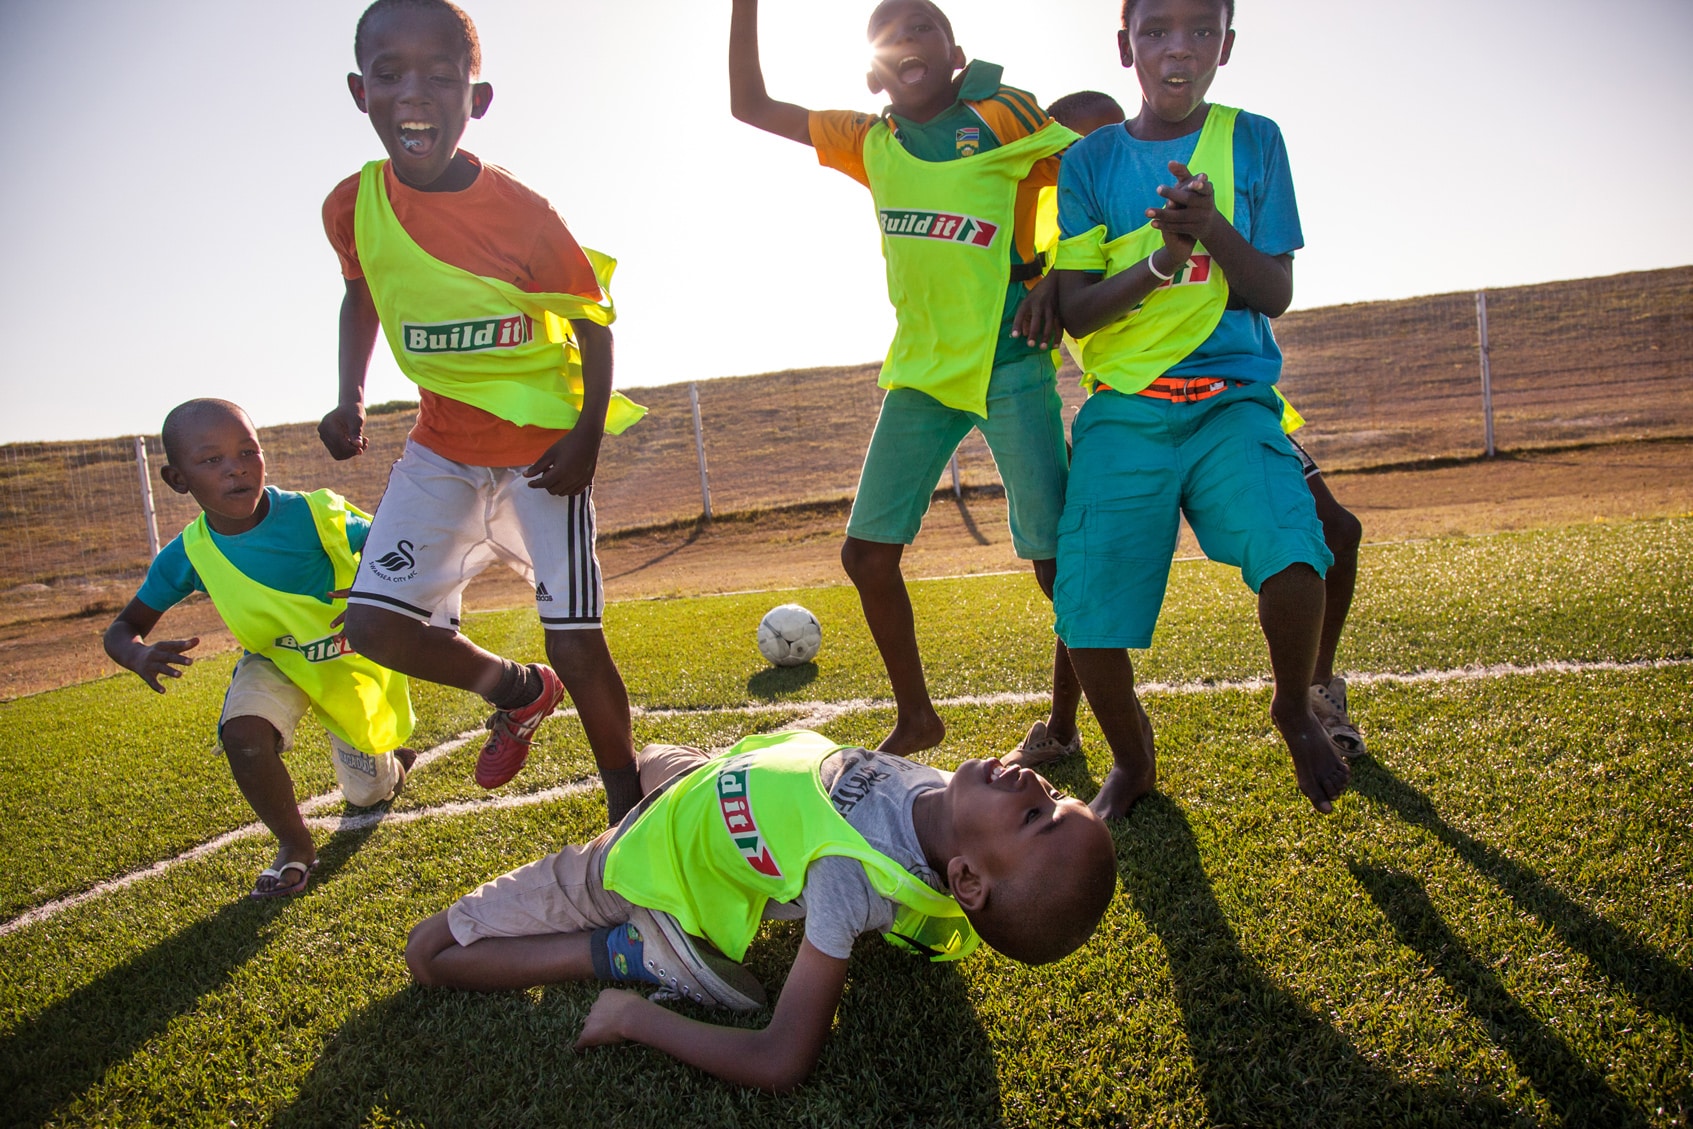 A group of children cheering on a soccer field.